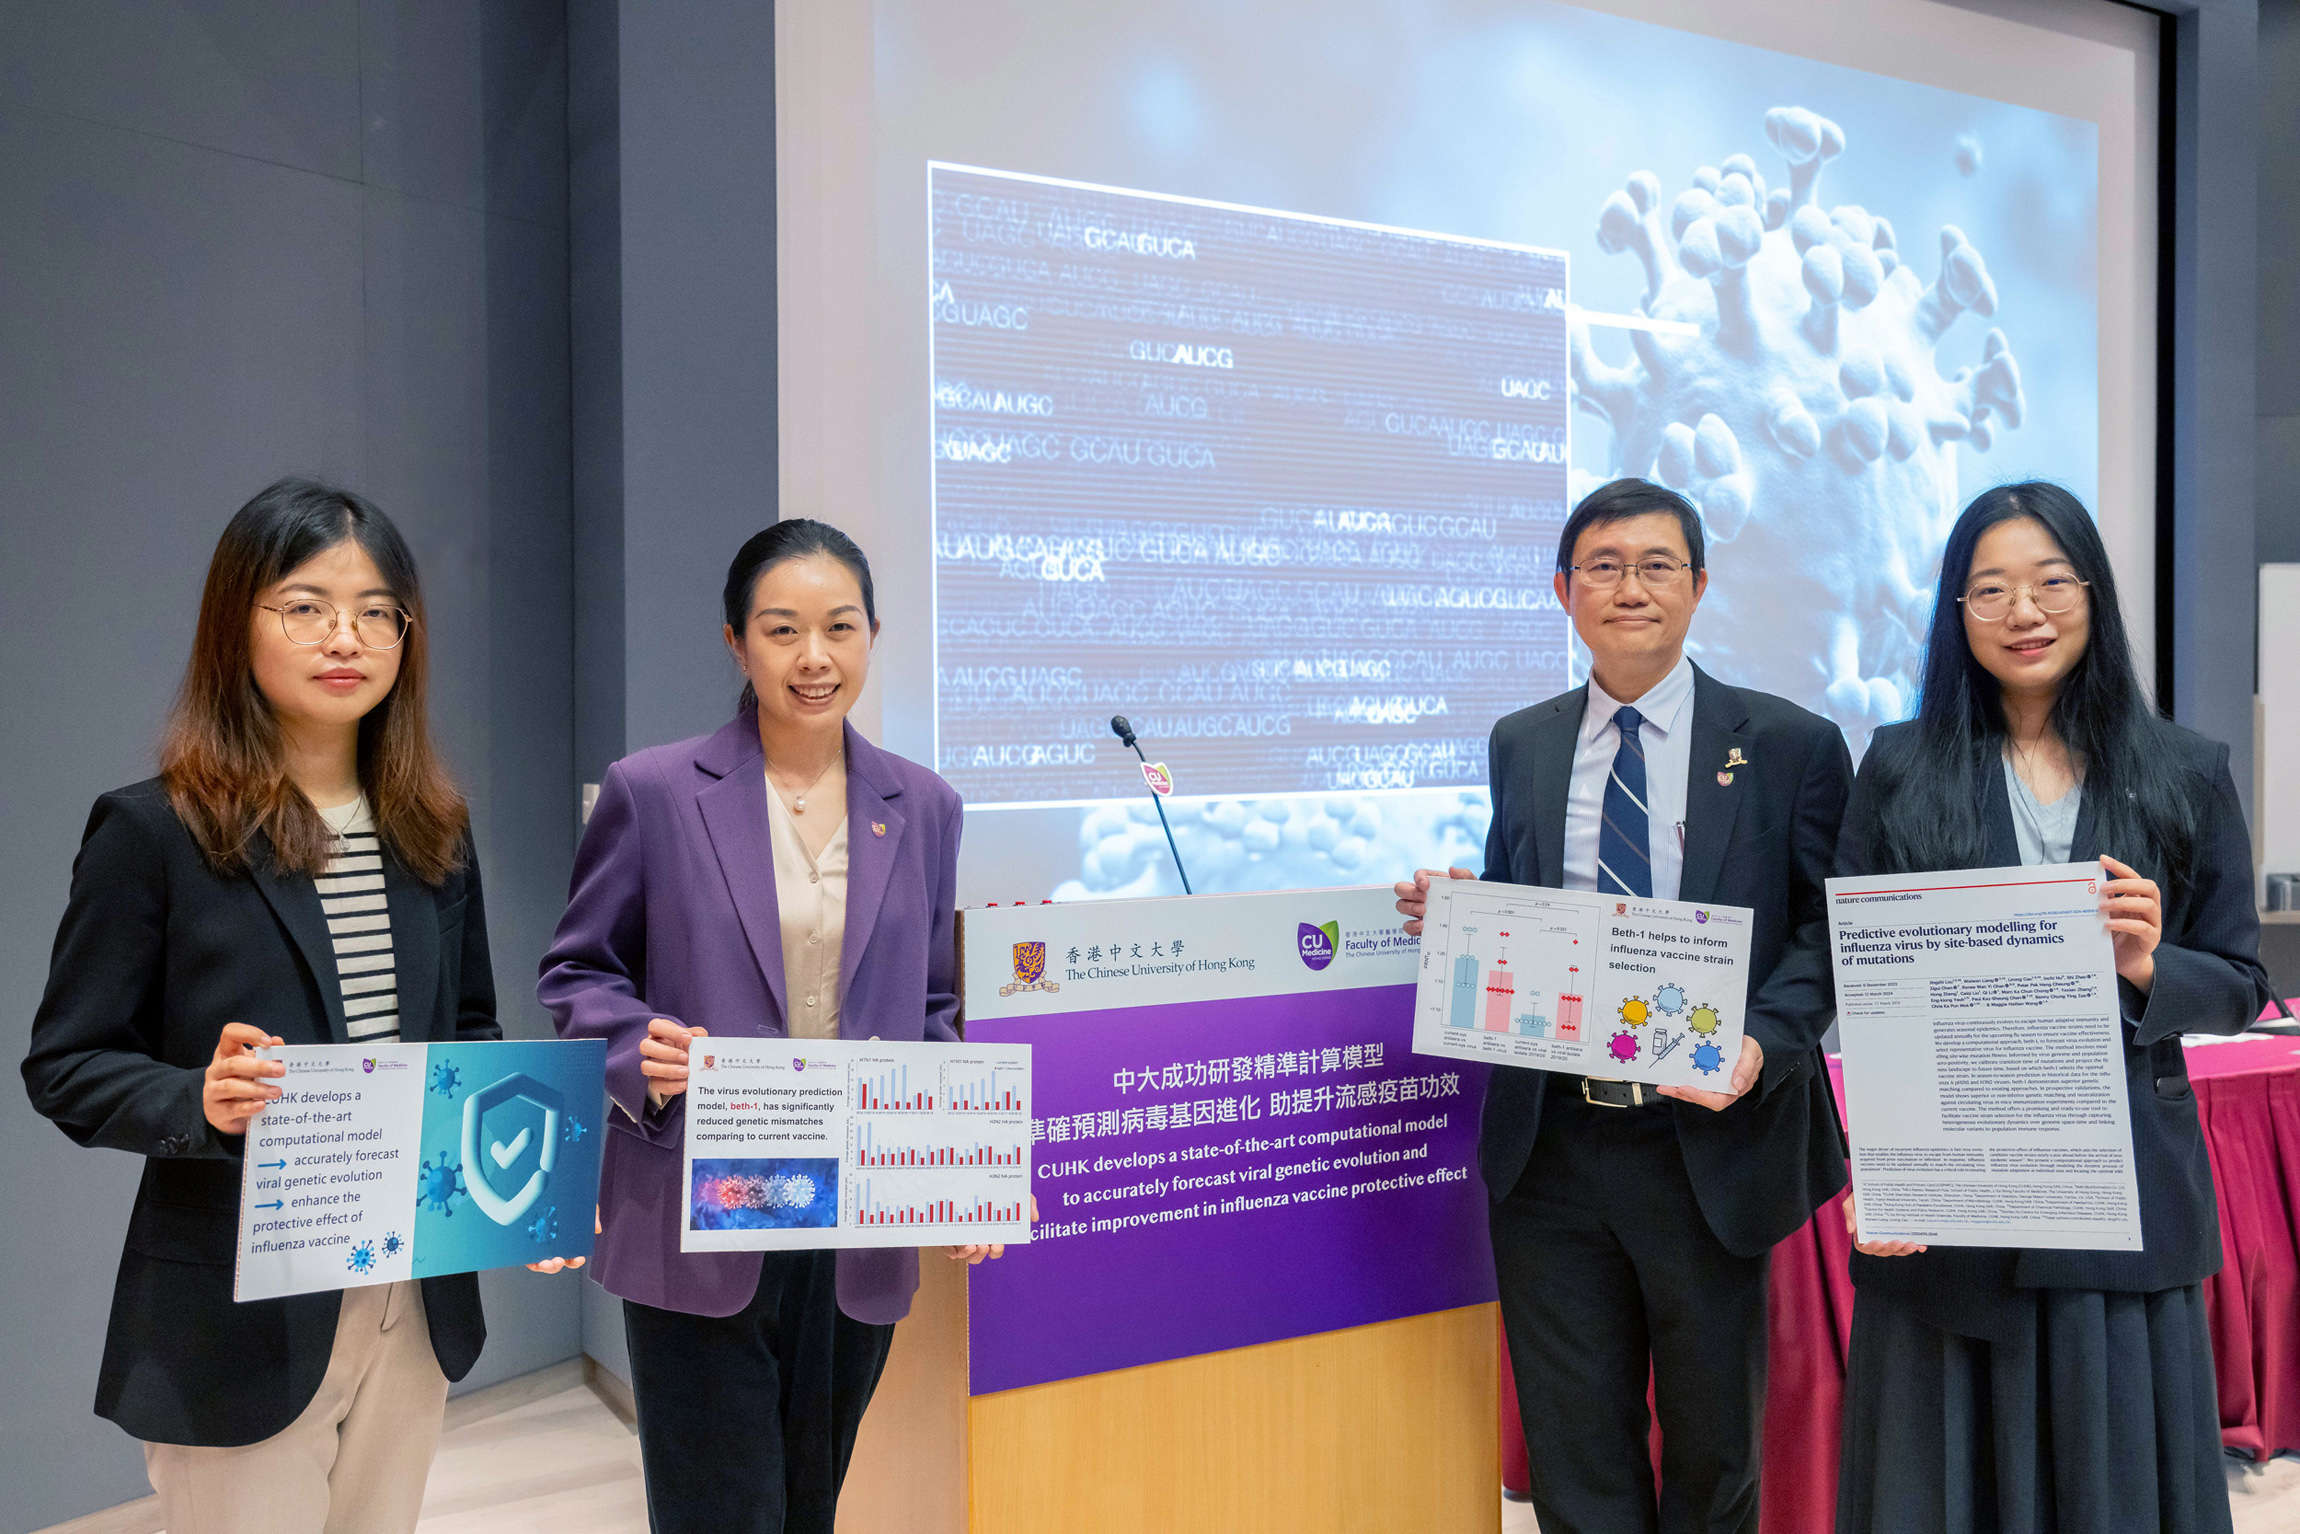 Featured in the photo are the research team members. (From left) Dr Cao Lirong; Professor Maggie Wang, Associate Professor; Professor Benny Zee, Director of the Centre for Clinical Research and Biostatistics; and Ms Lou Jingzhi, PhD student, from The Jockey Club School of Public Health and Primary Care at CU Medicine.